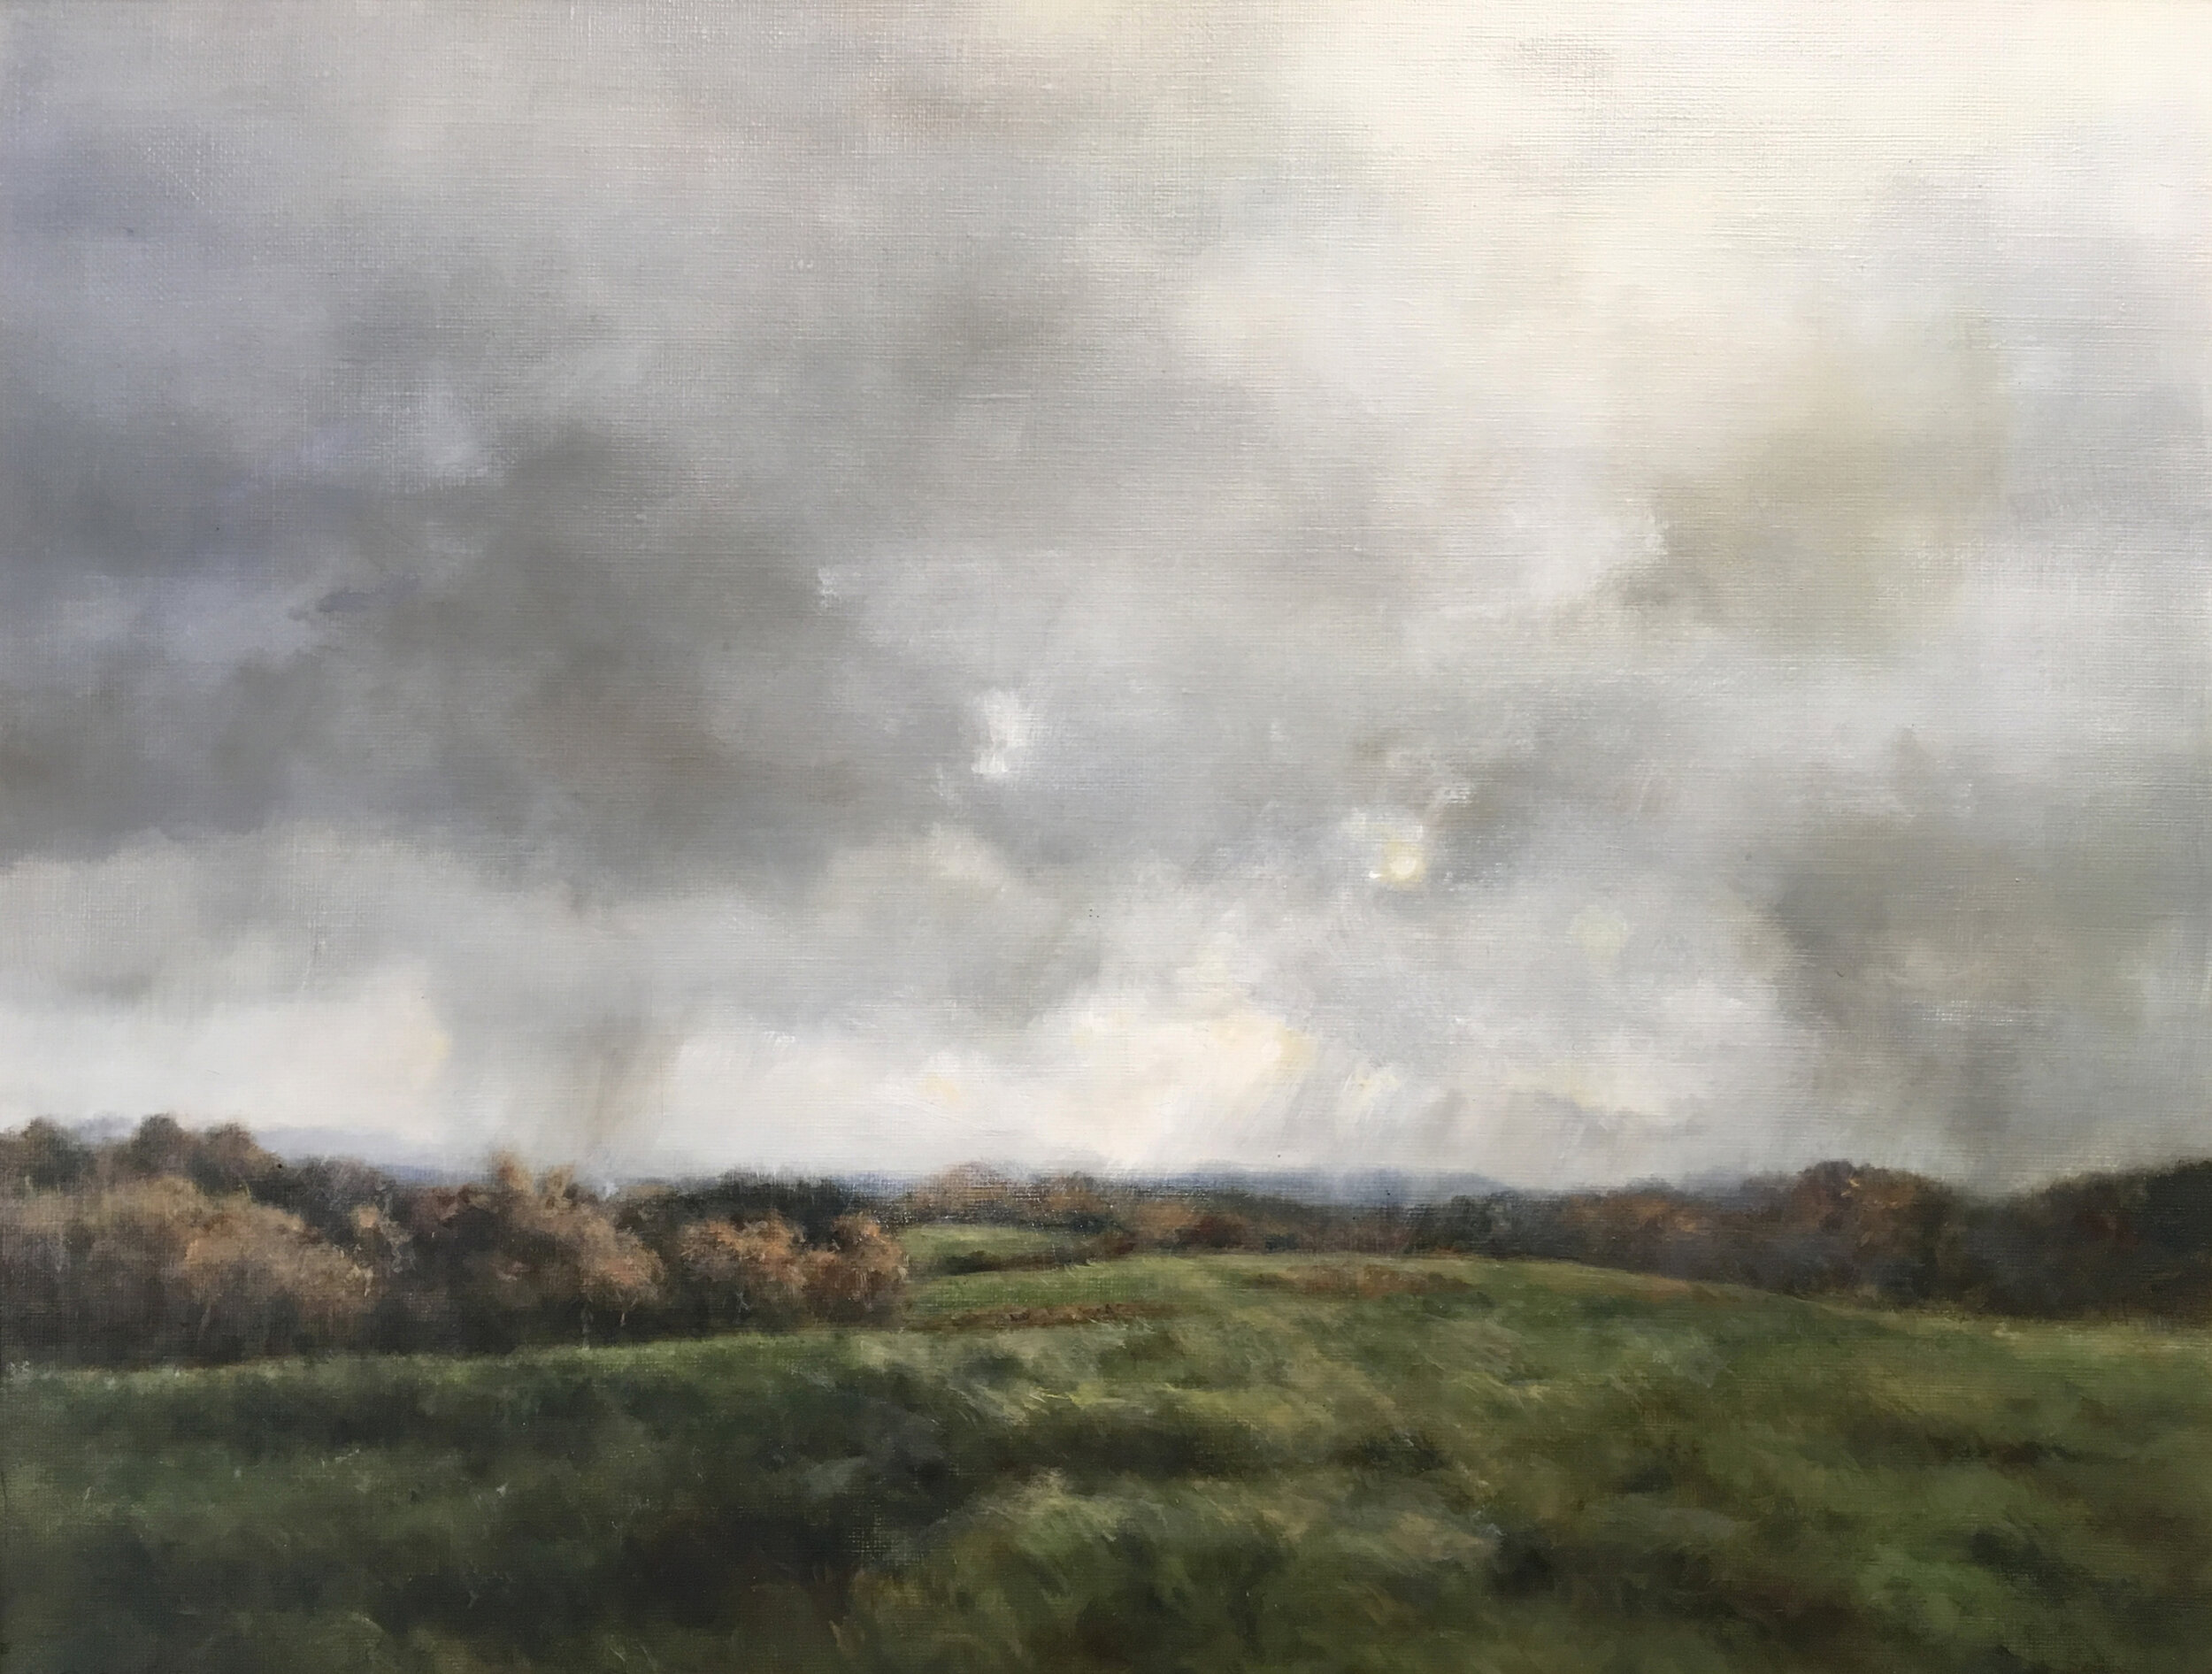  Mary Lou Schempf  Afternoon Rain,  14” x 18”, oil on linen  (private collection)                                                                                                            